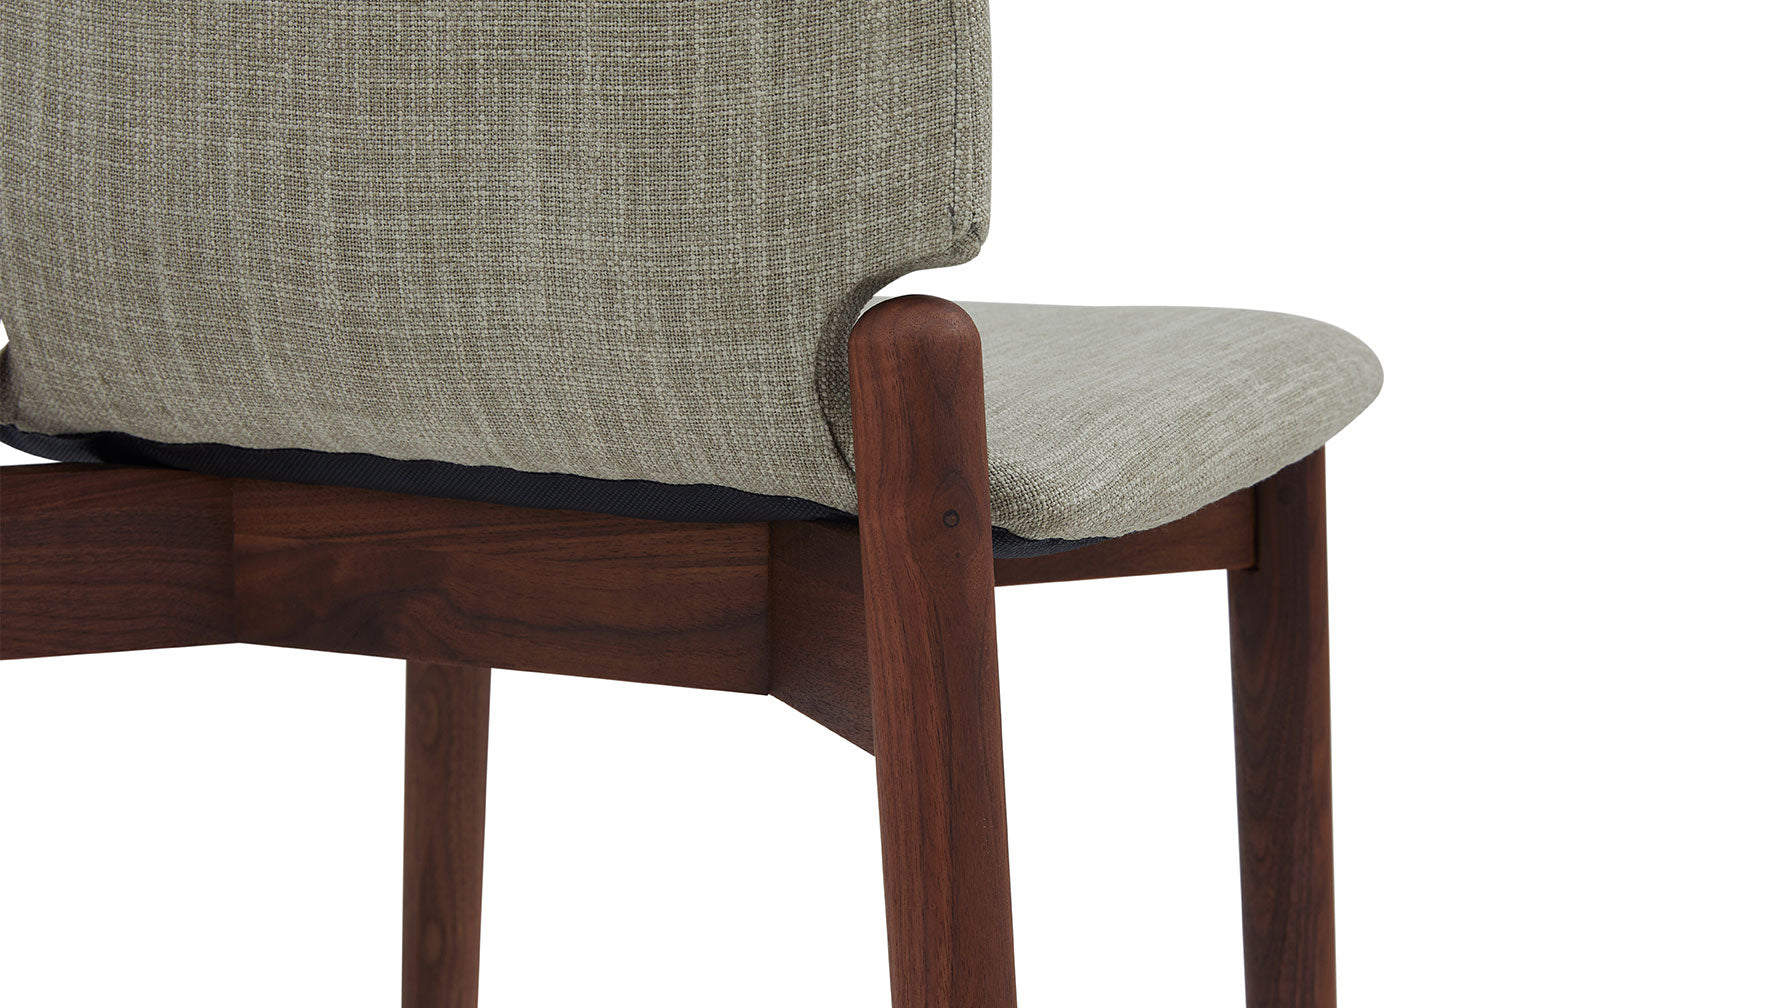 Dine In Stool, Counter, Walnut/Taupe Fabric - Image 7